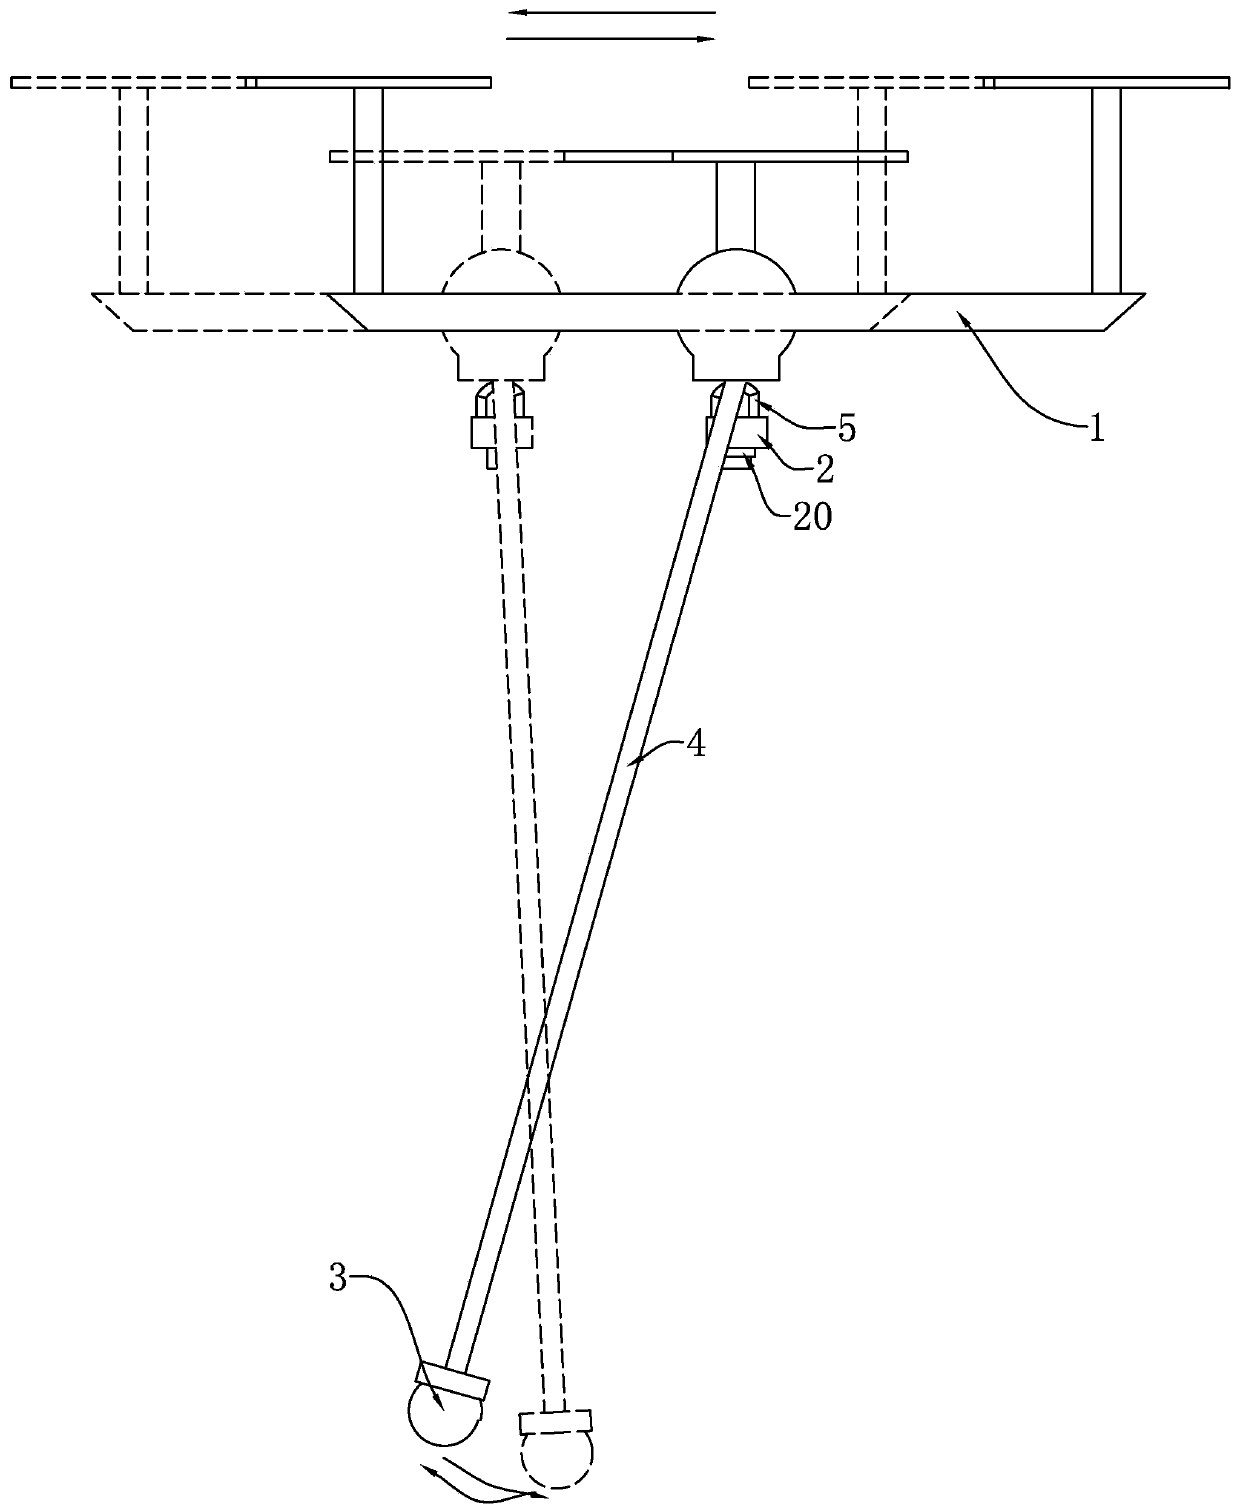 Surveying and mapping device and method